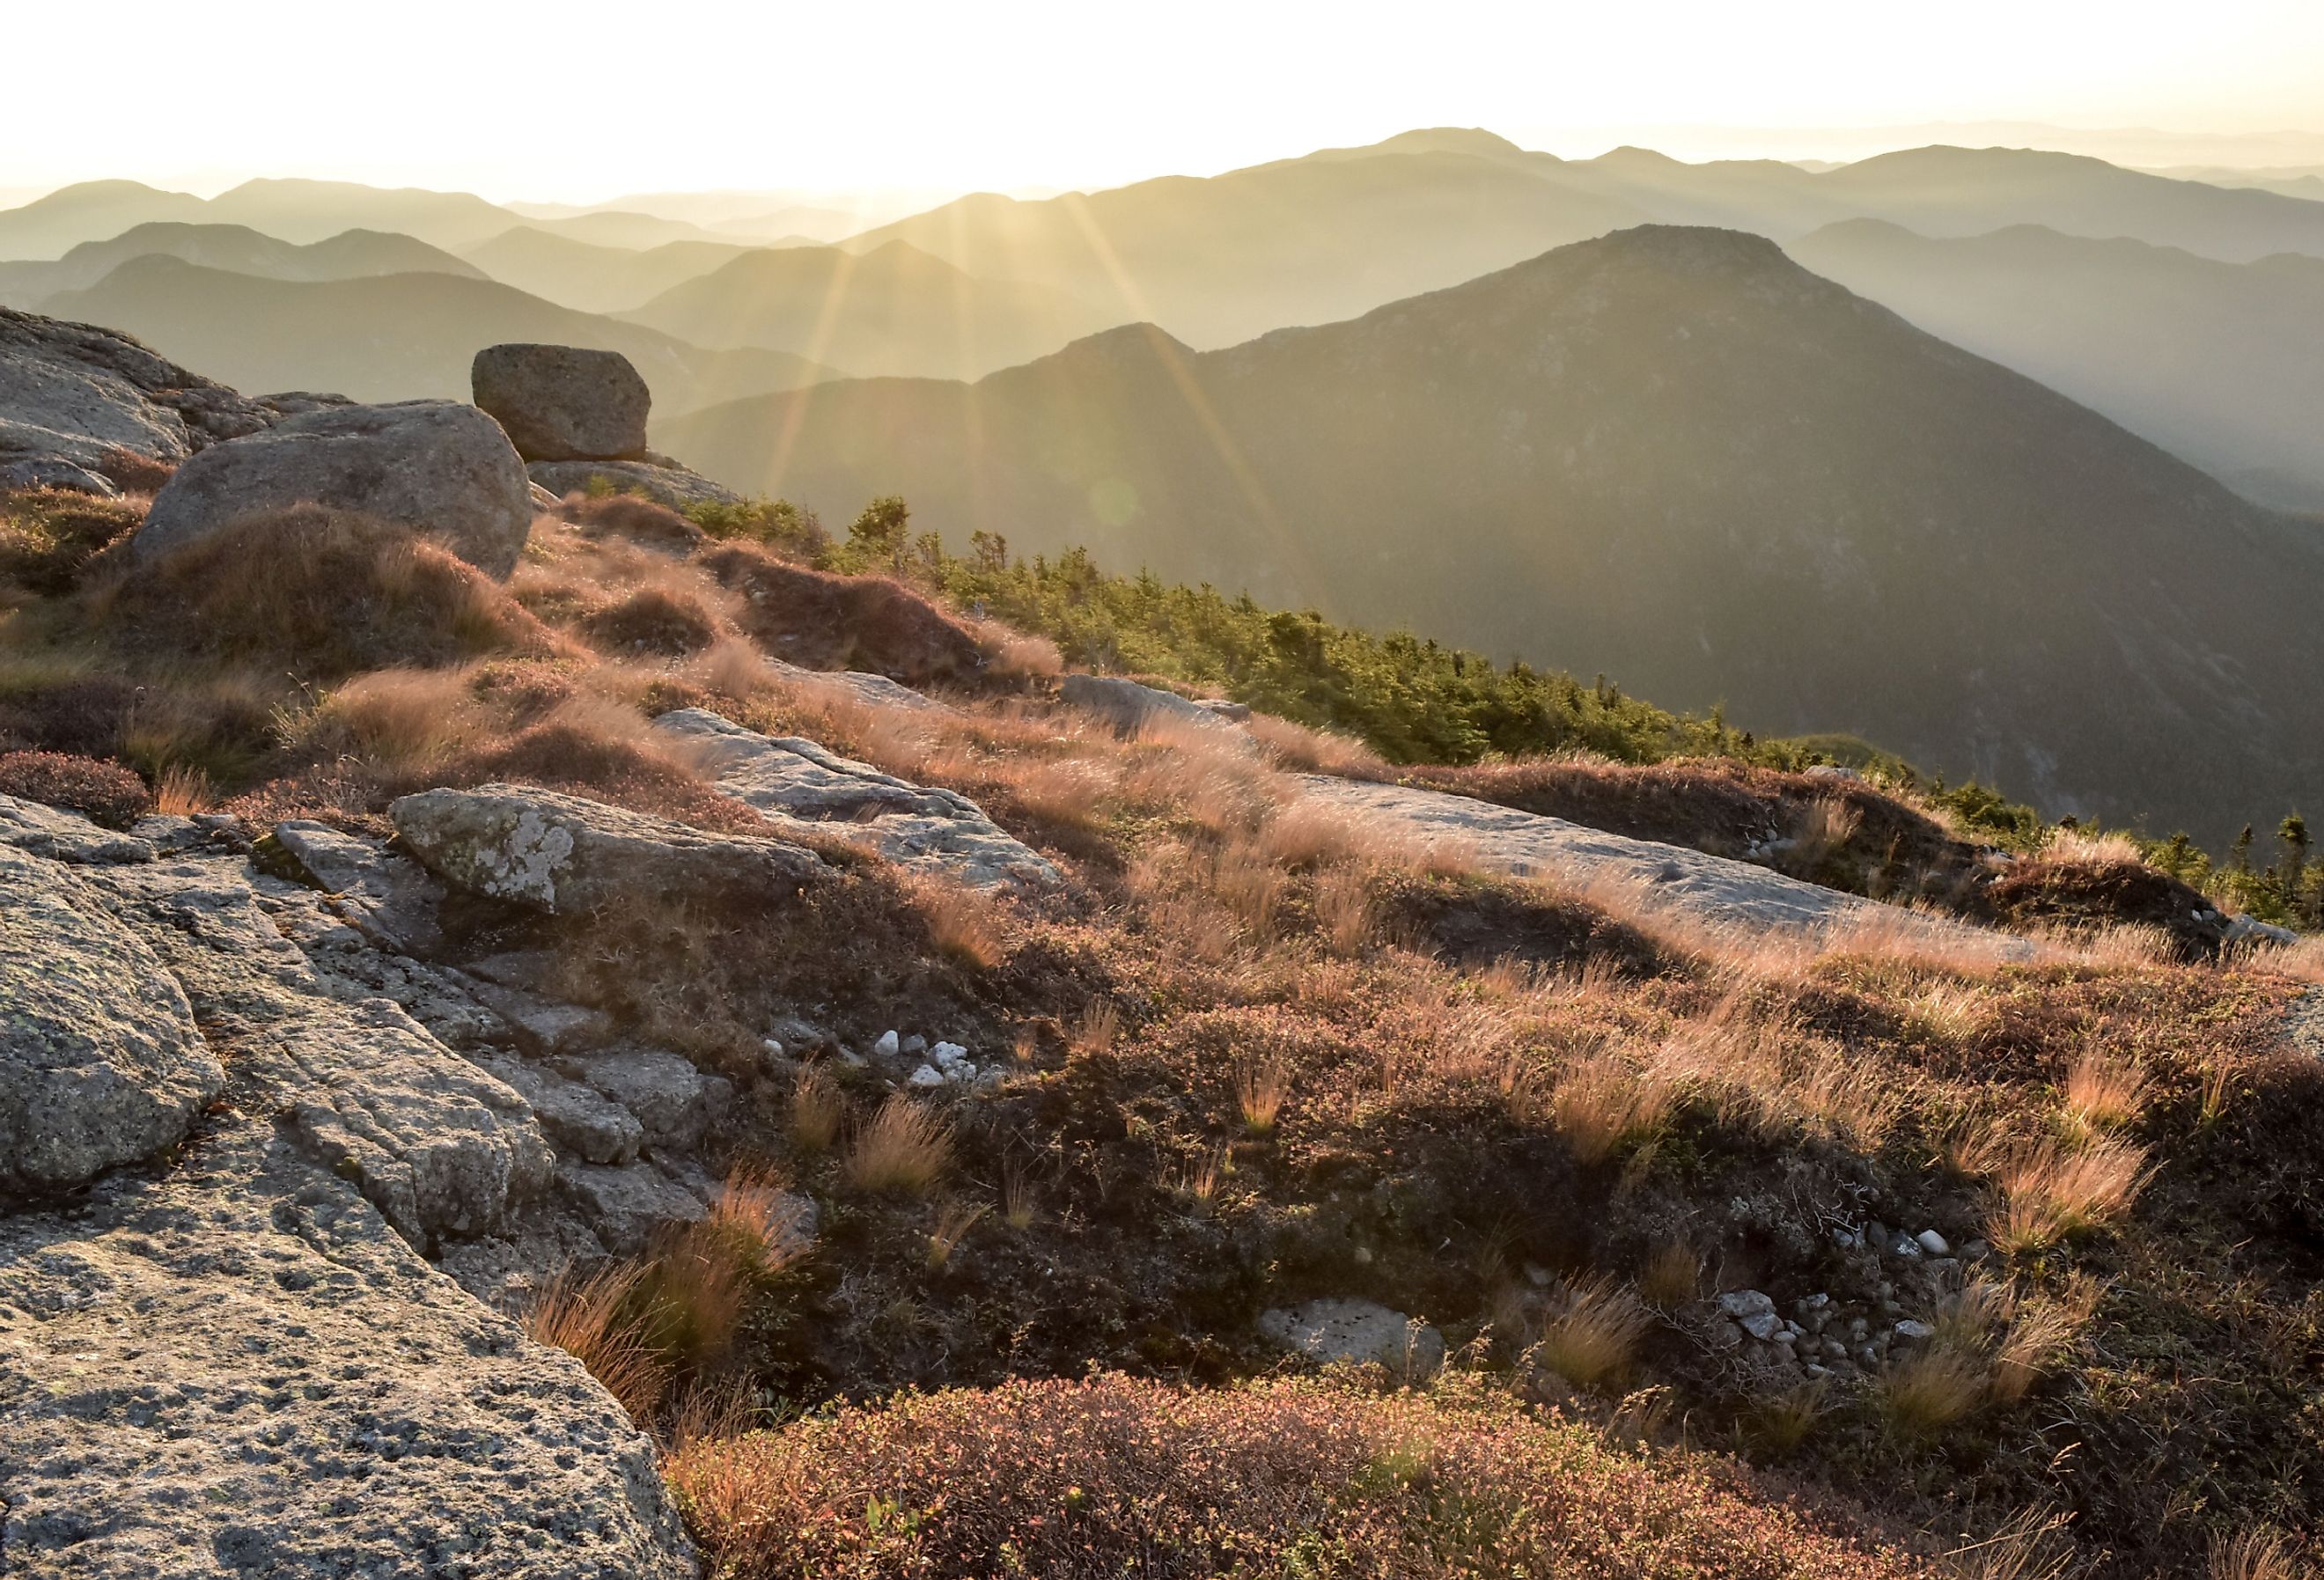 Sunrise from Mount Marcy (the tallest mountain in New York State) looking at Haystack Mountain. Image credit Josh Bukoski 1 via Shutterstock.